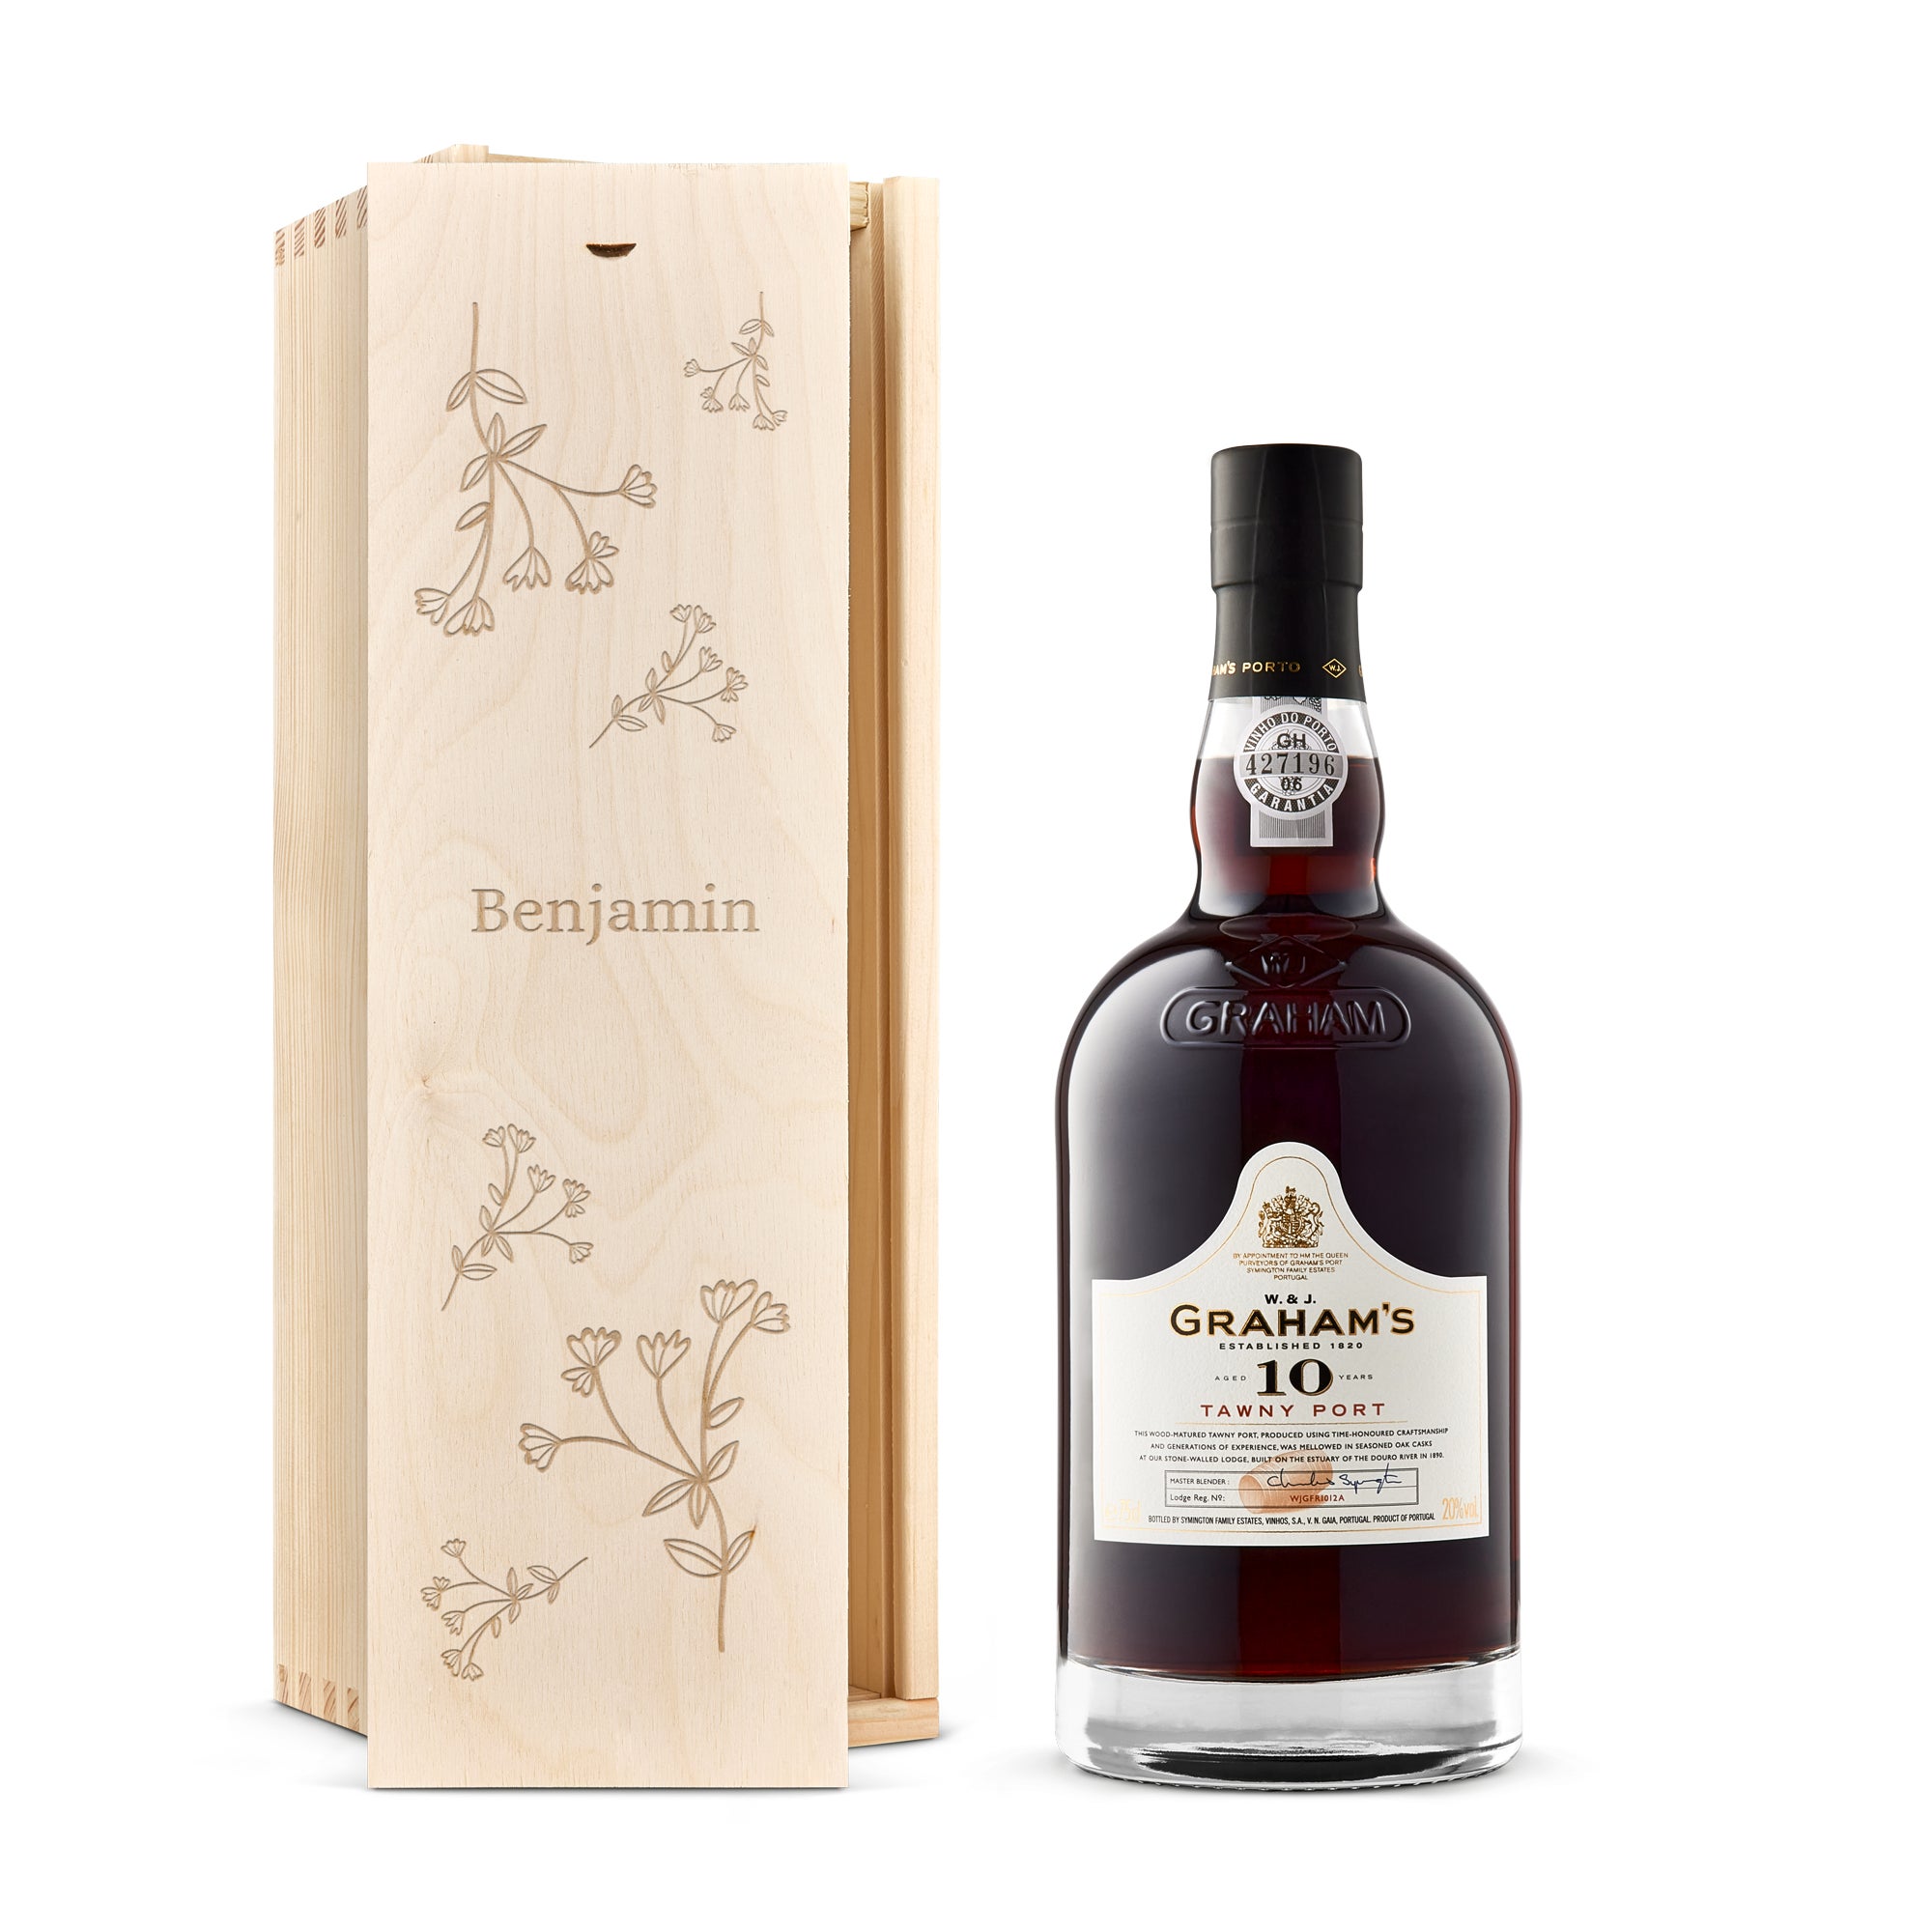 Personalised spirits - Port - Graham's - 10 years - Engraved wooden case